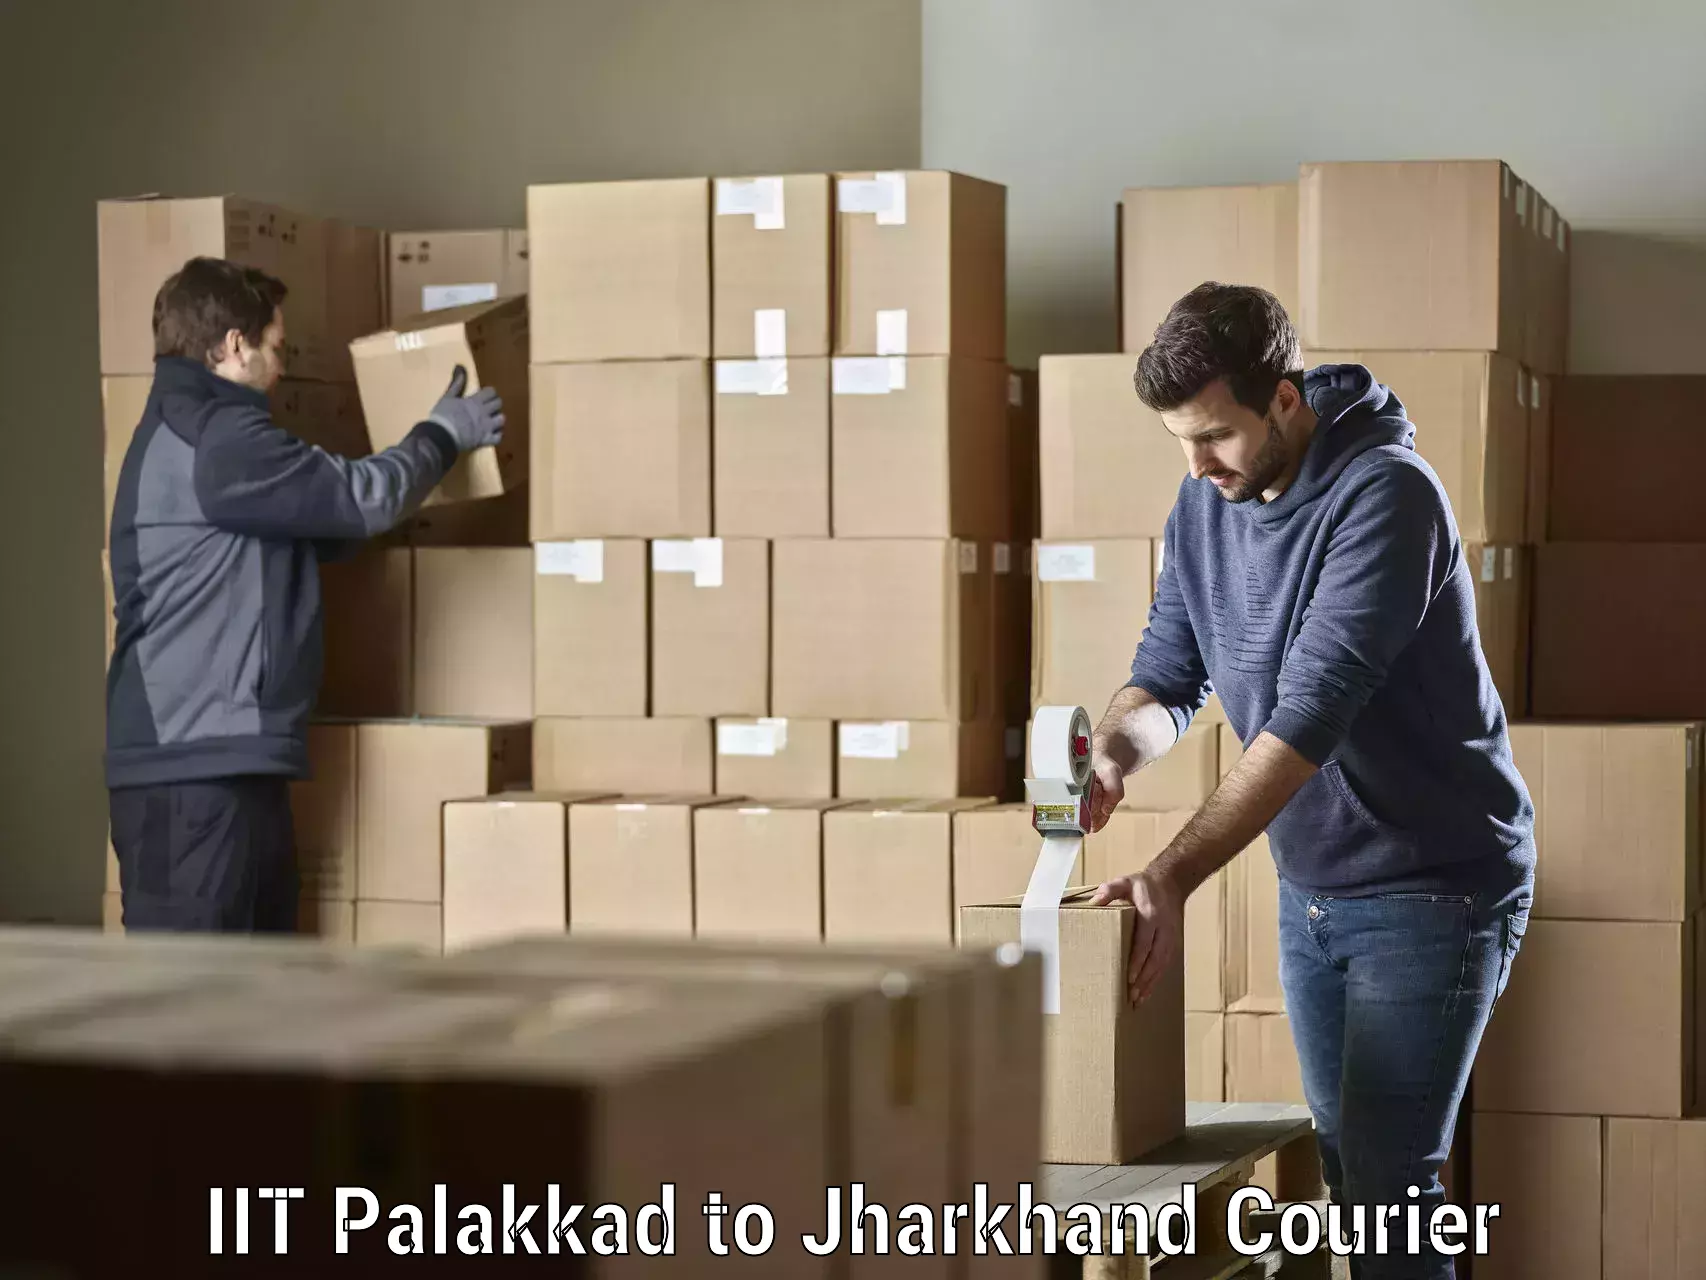 Courier dispatch services IIT Palakkad to Jharkhand